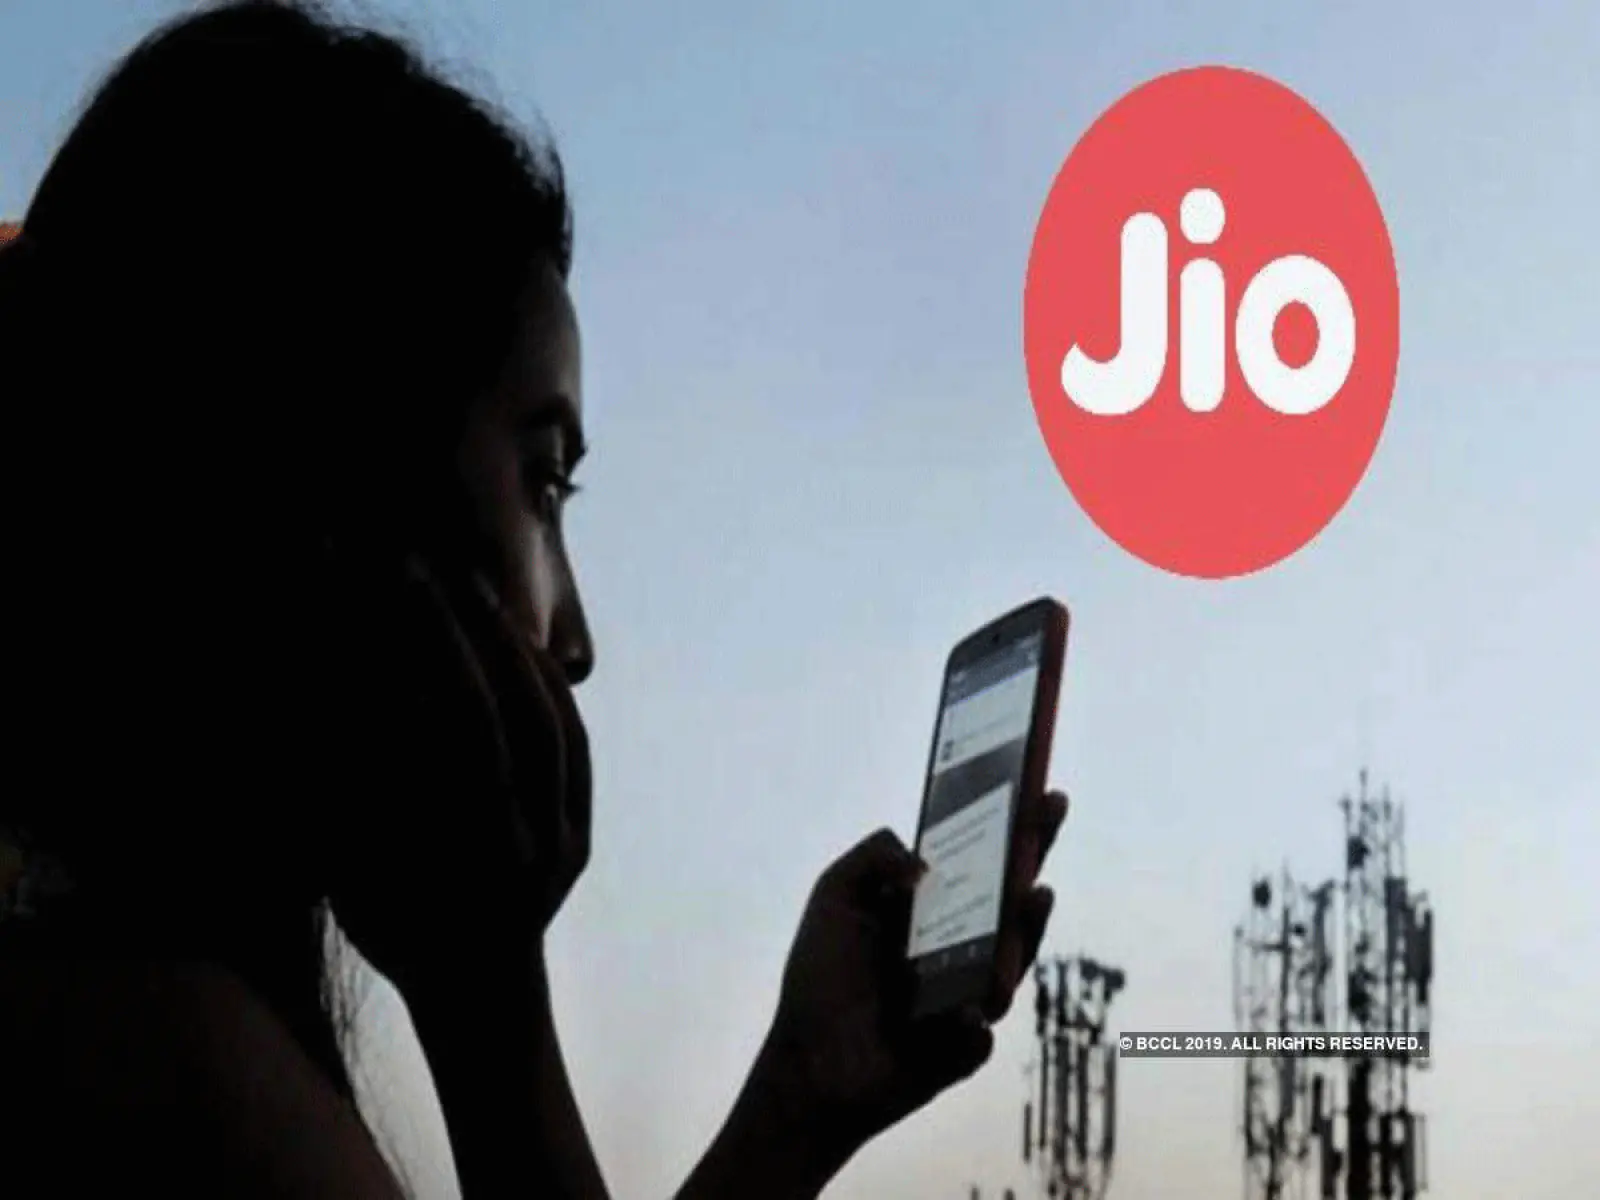 Jio Down: Jio service stopped in many areas of Mumbai, thousands of users troubled